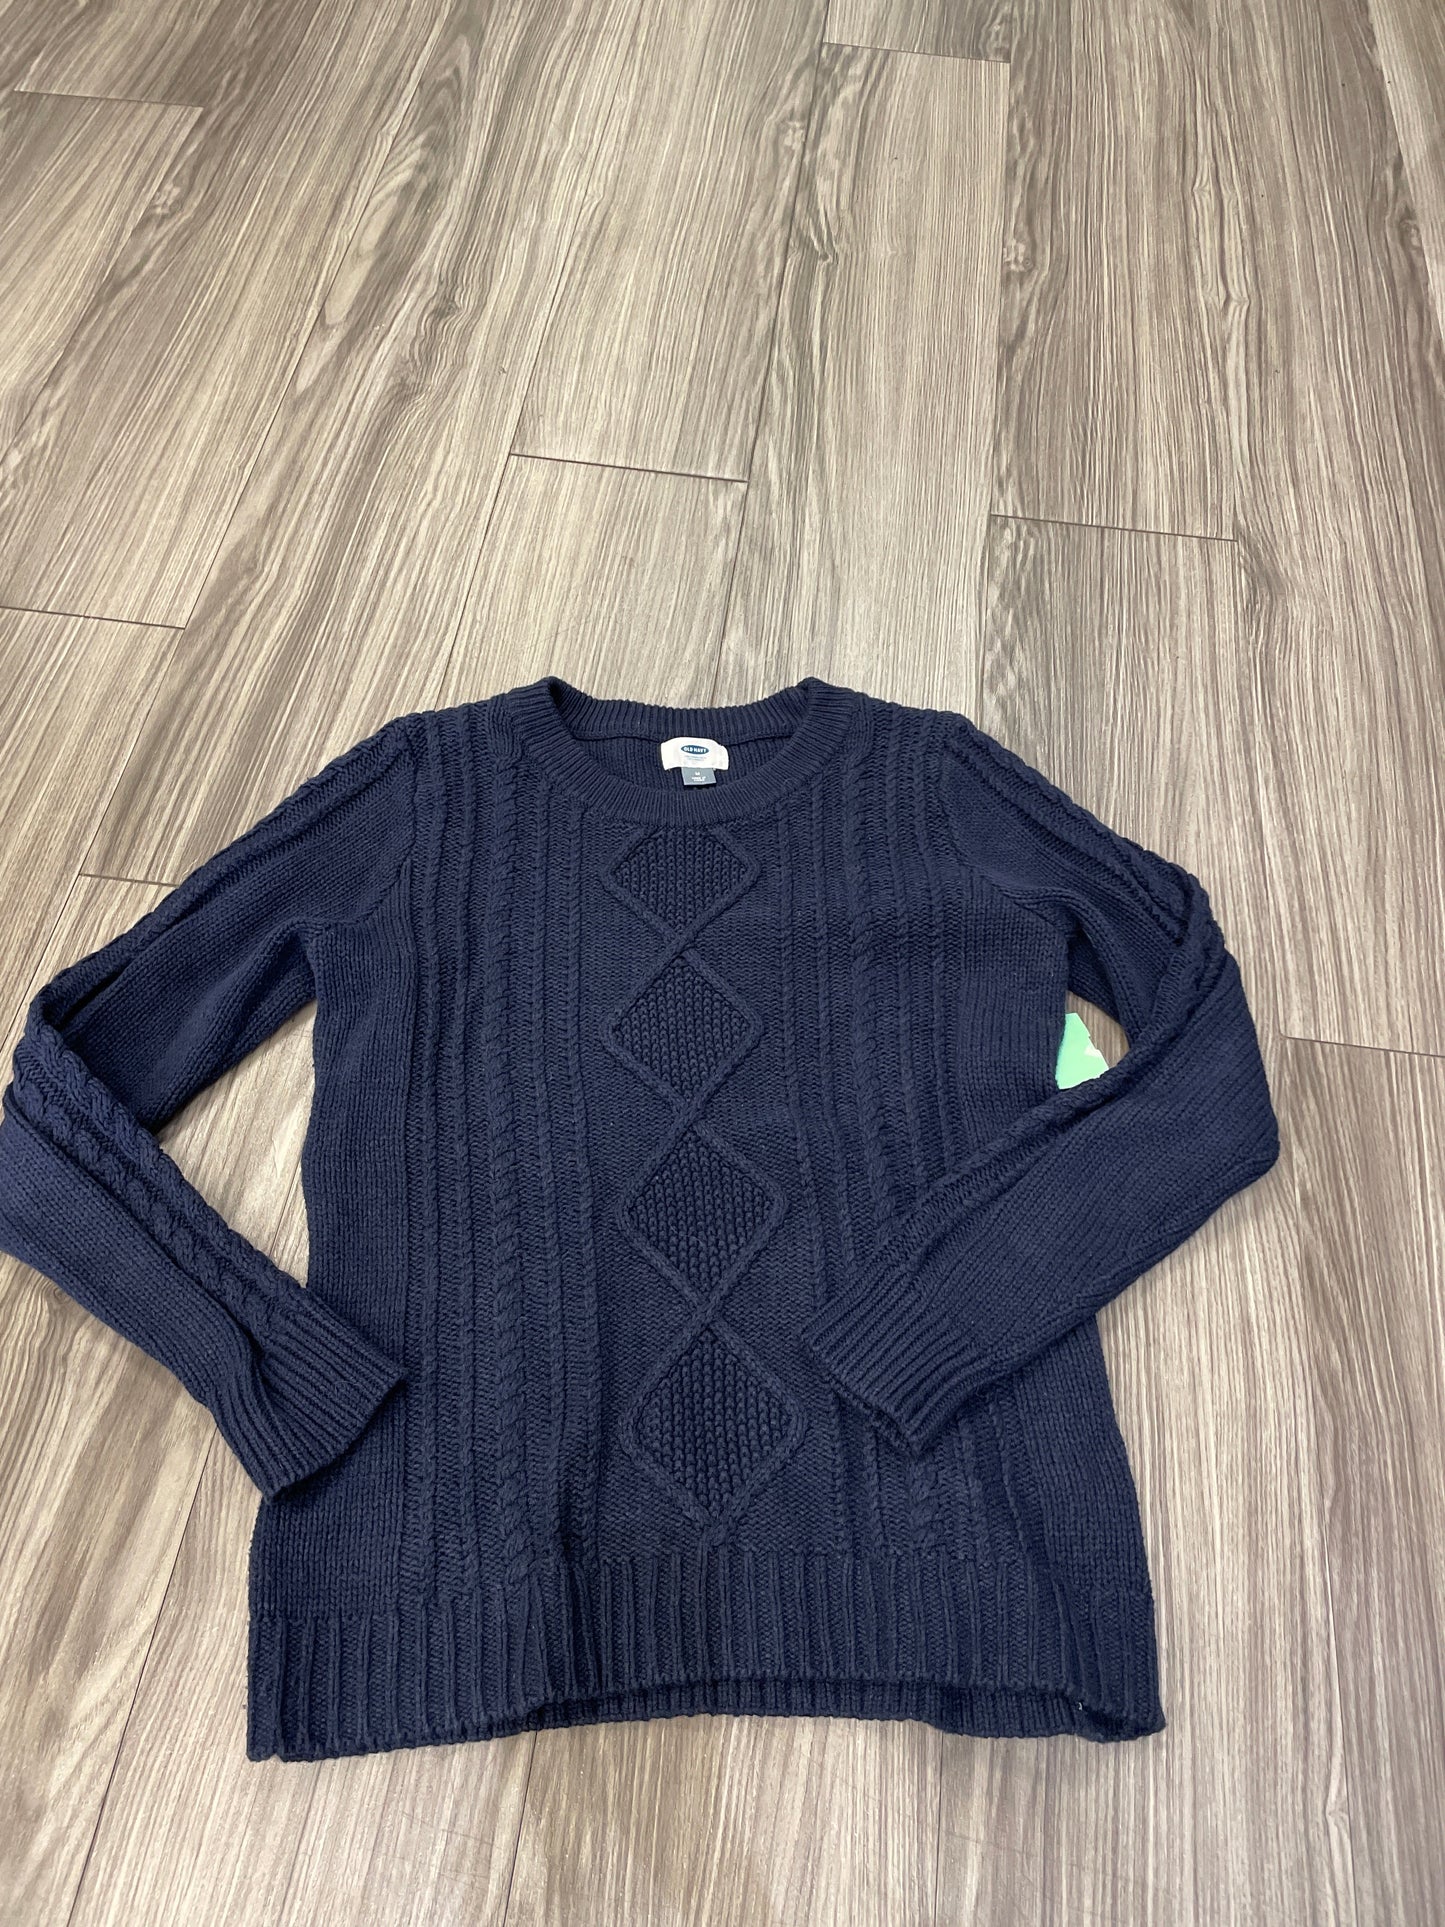 Navy Sweater Old Navy, Size M